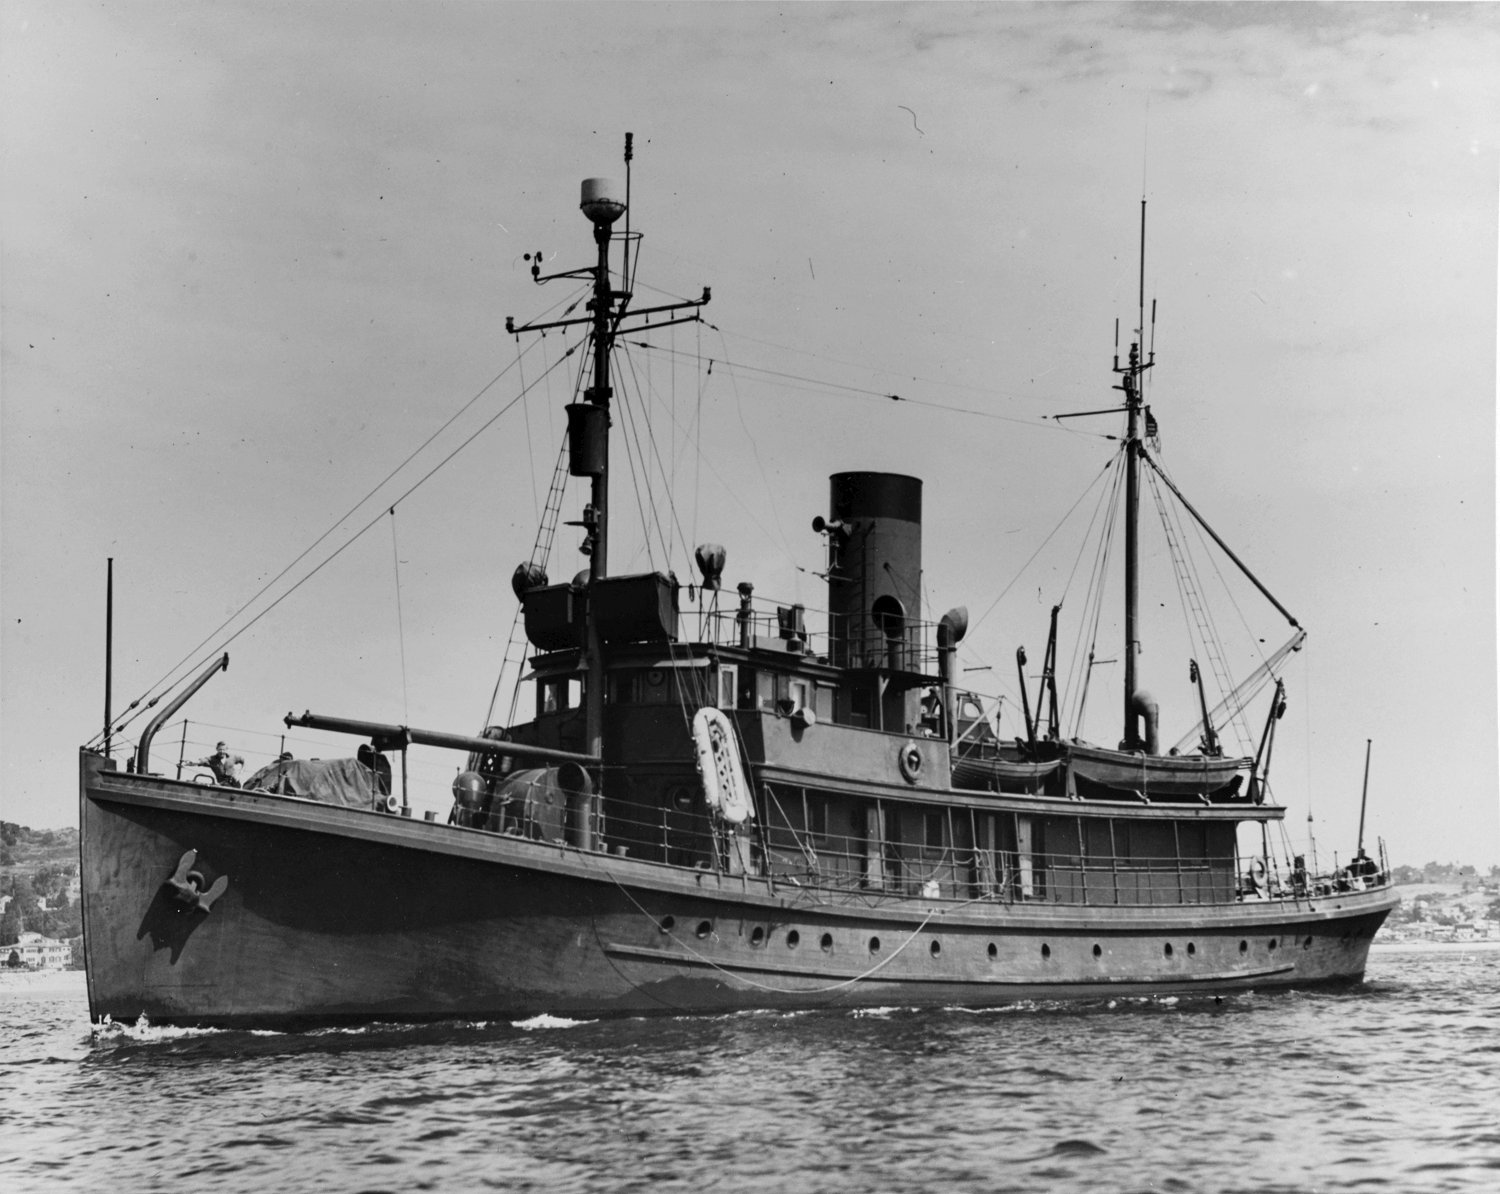 The USS Jasper, a research vessel made from a converted motor yacht, cruises at sea in 1945.